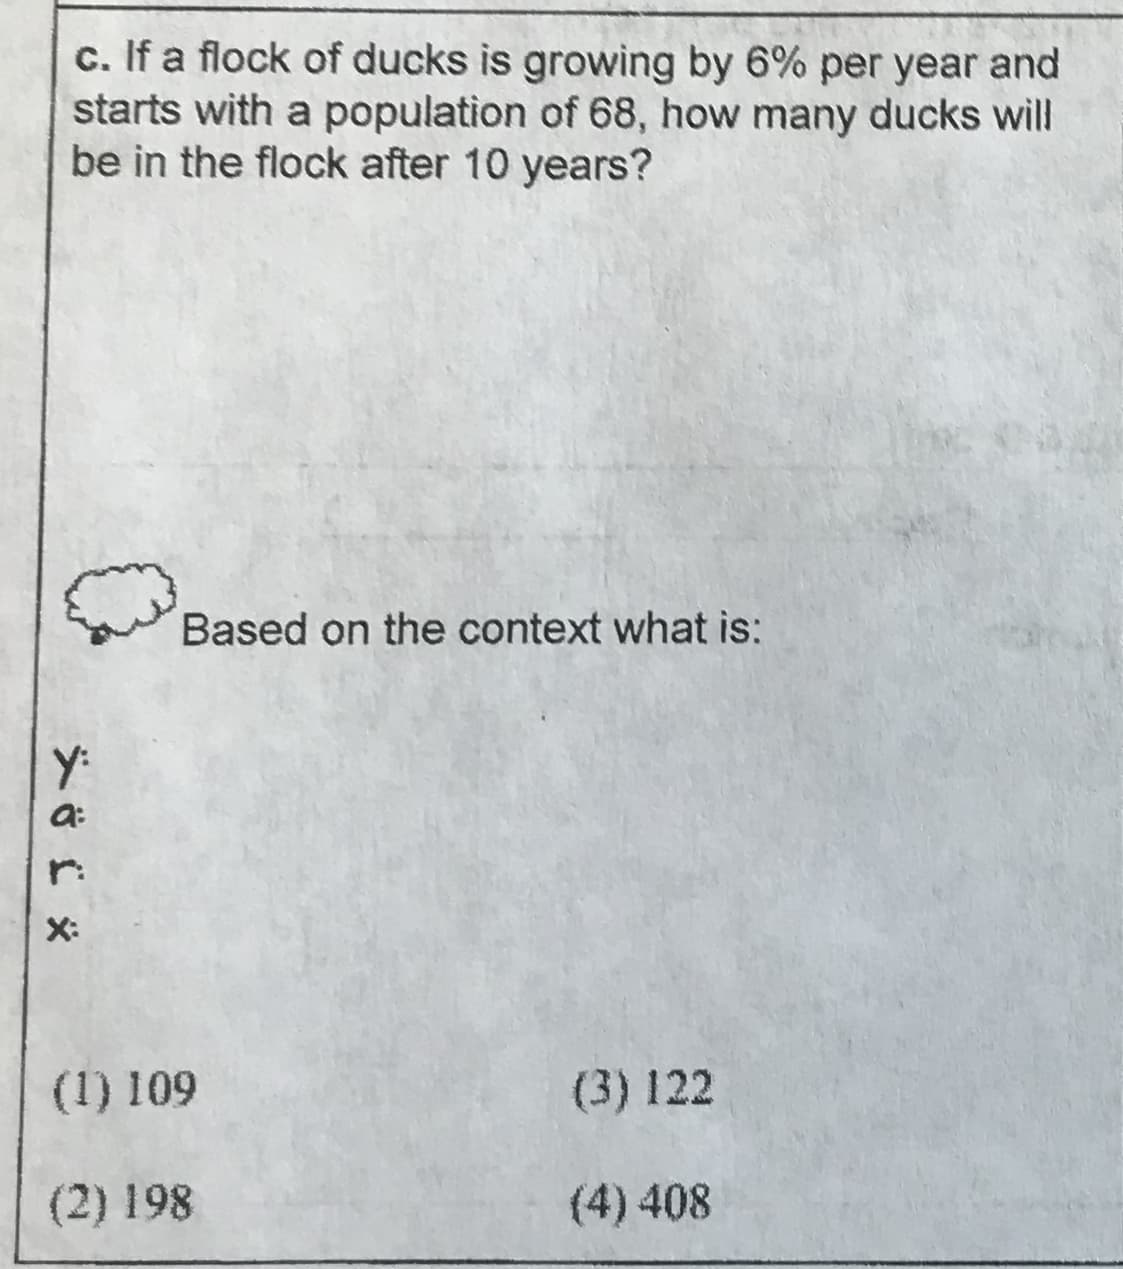 c. If a flock of ducks is growing by 6% per year and
starts with a population of 68, how many ducks will
be in the flock after 10 years?
Based on the context what is:
r:
(3) 122
(1) 109
(4) 408
(2) 198
